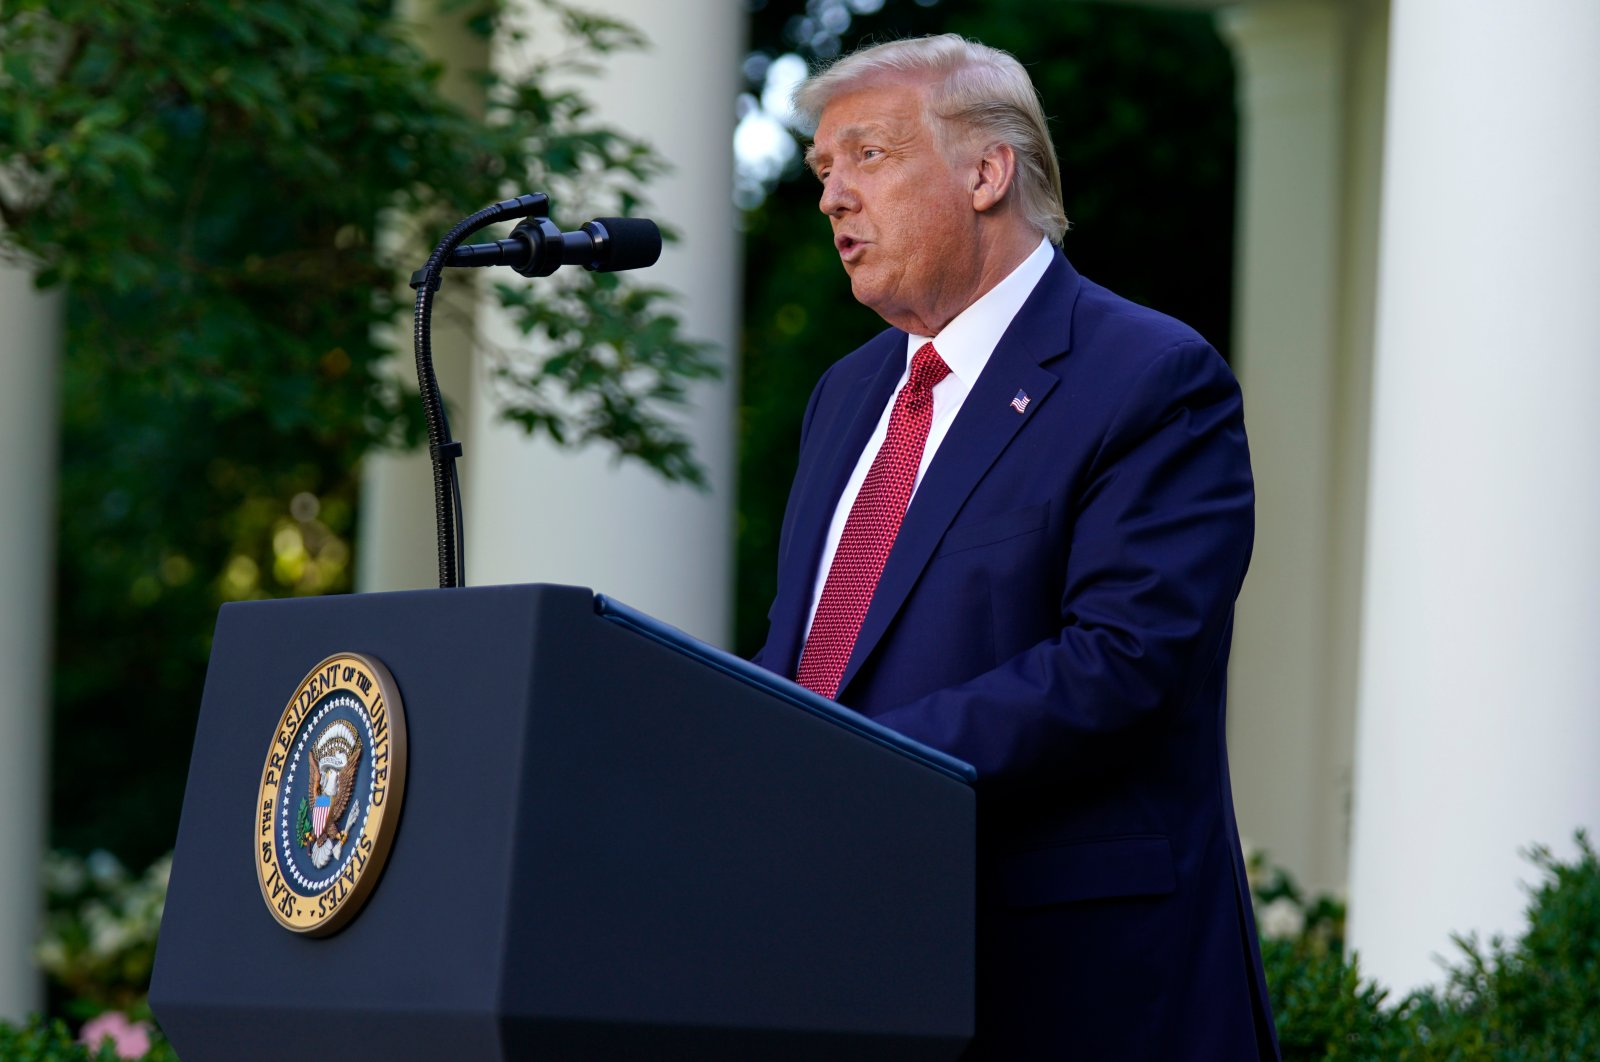 U.S. President Donald Trump speaks during a news conference in the Rose Garden of the White House, Tuesday, July 14, 2020, in Washington. (AP Photo)